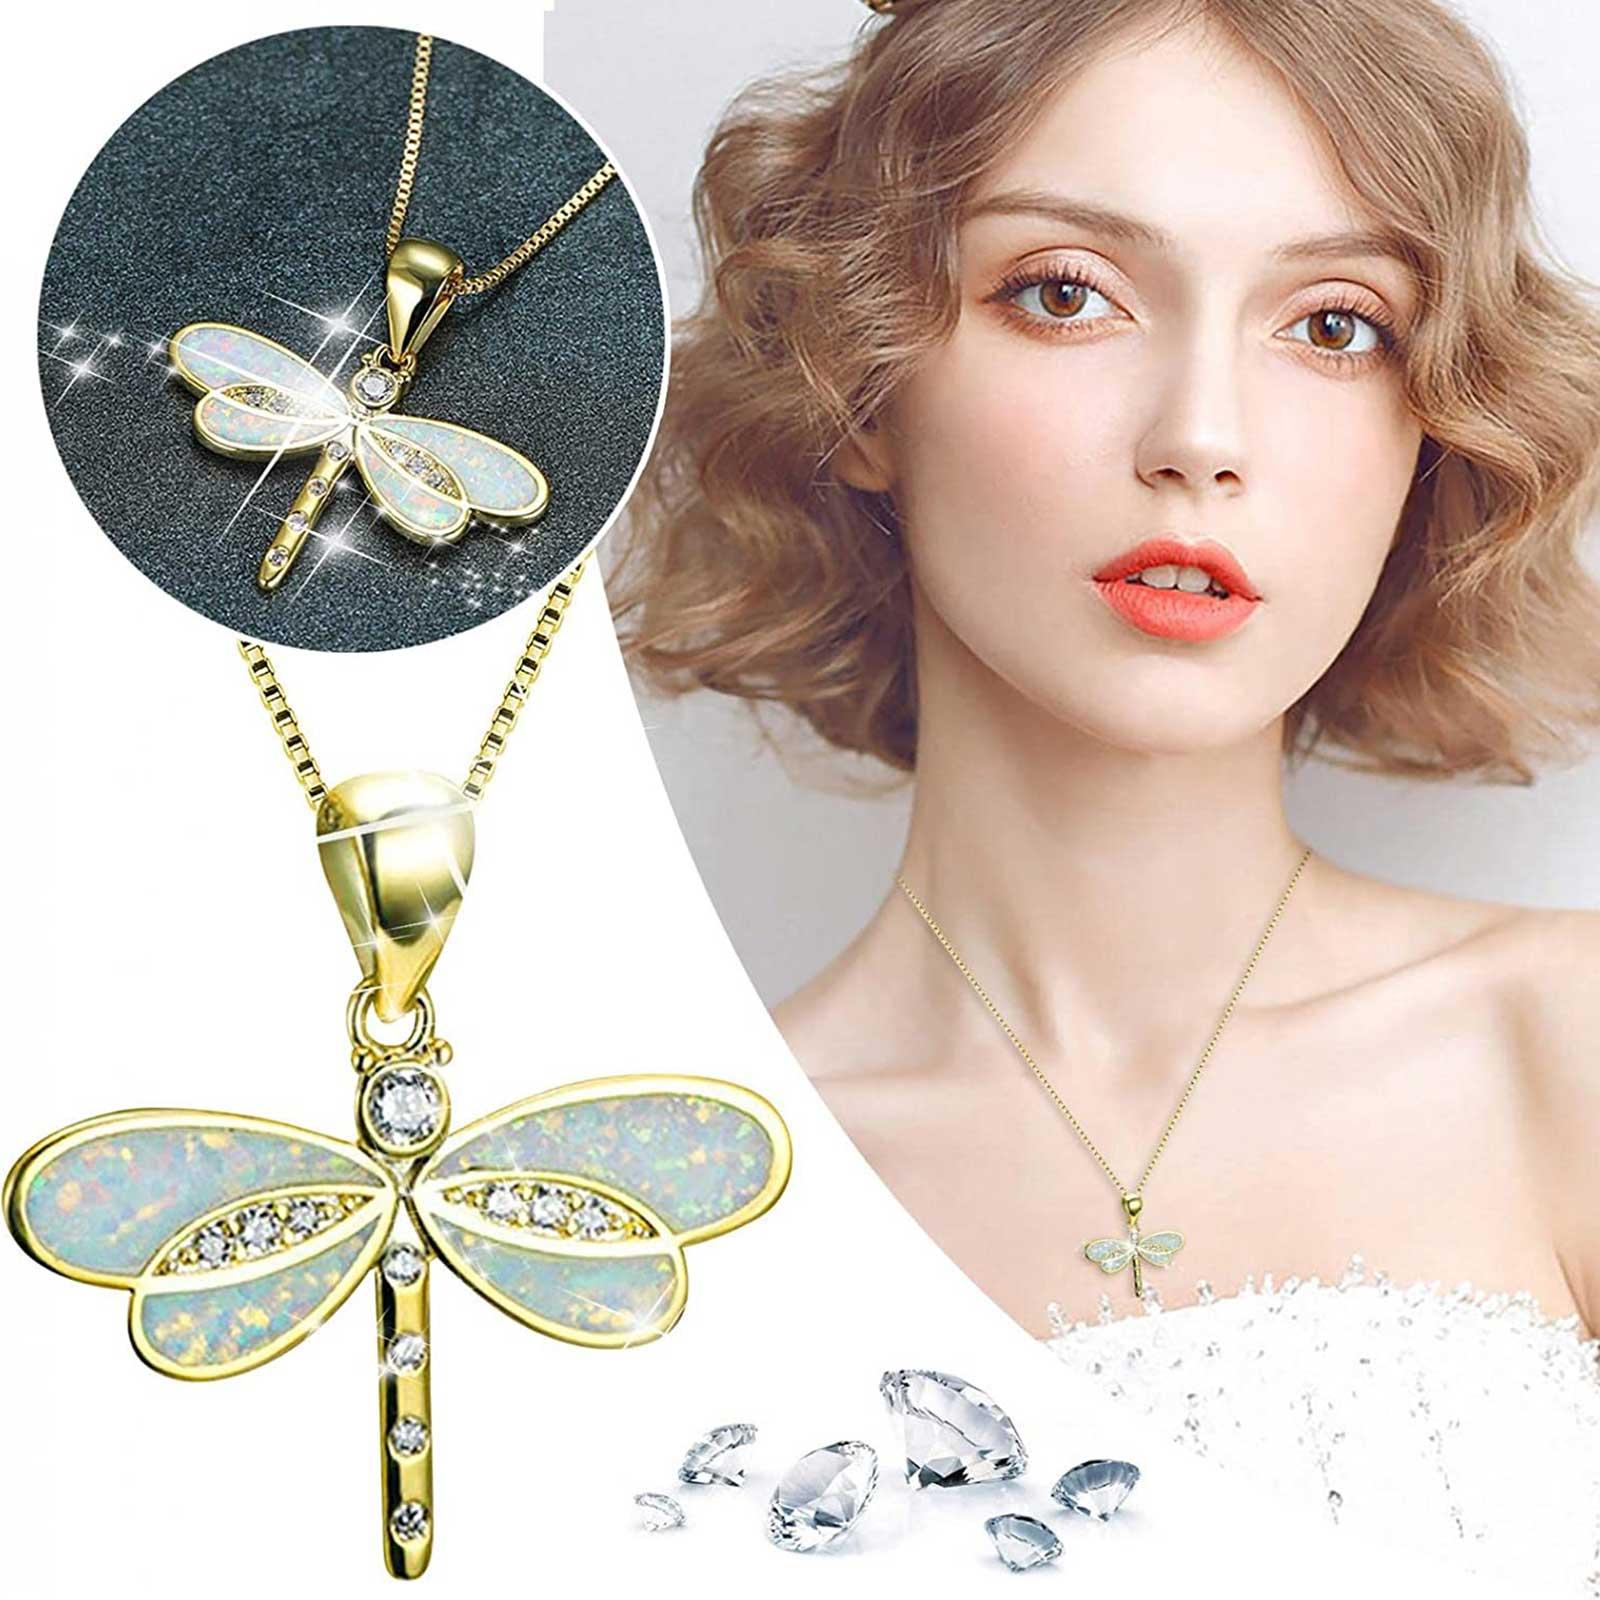 Dragonfly Necklace Pendant Choker For Women Girls White Gold Blue Silver Y5G3 - image 2 of 9